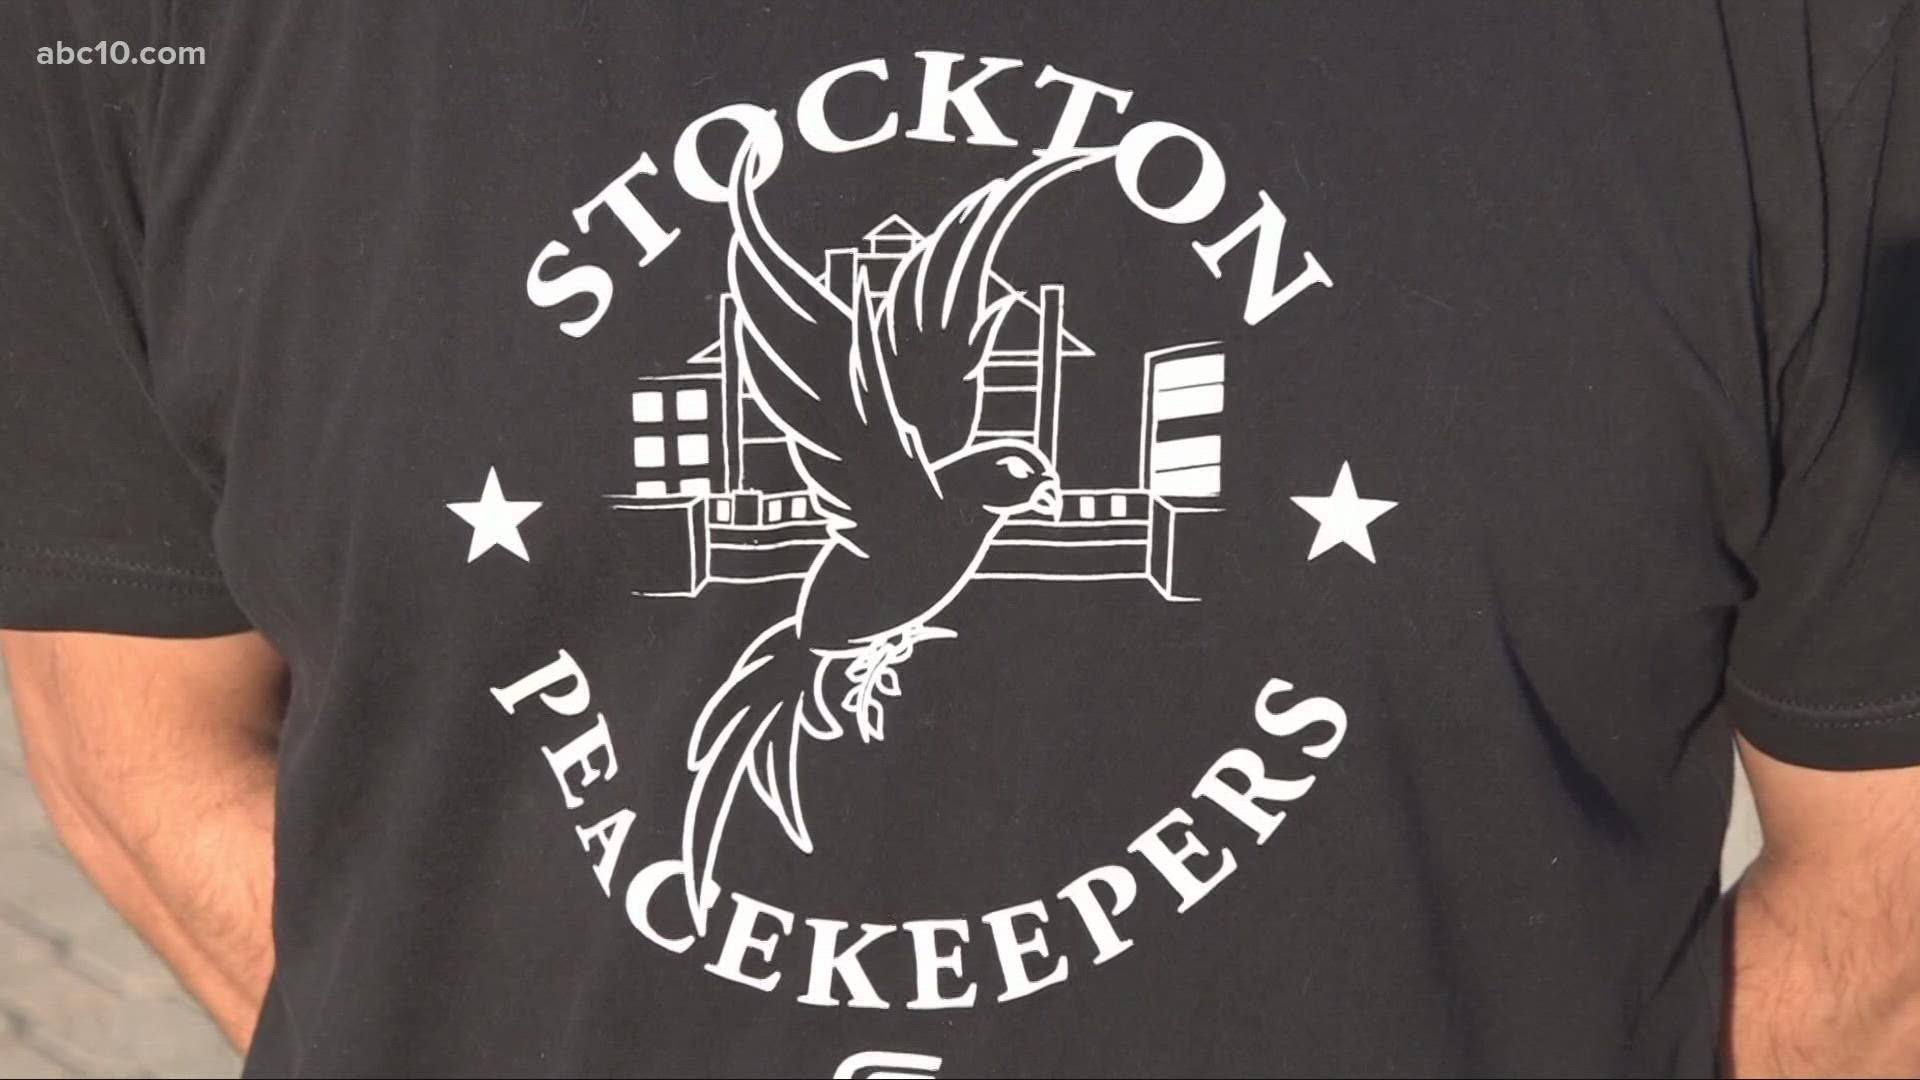 Stockton police see a decrease in homicide numbers.